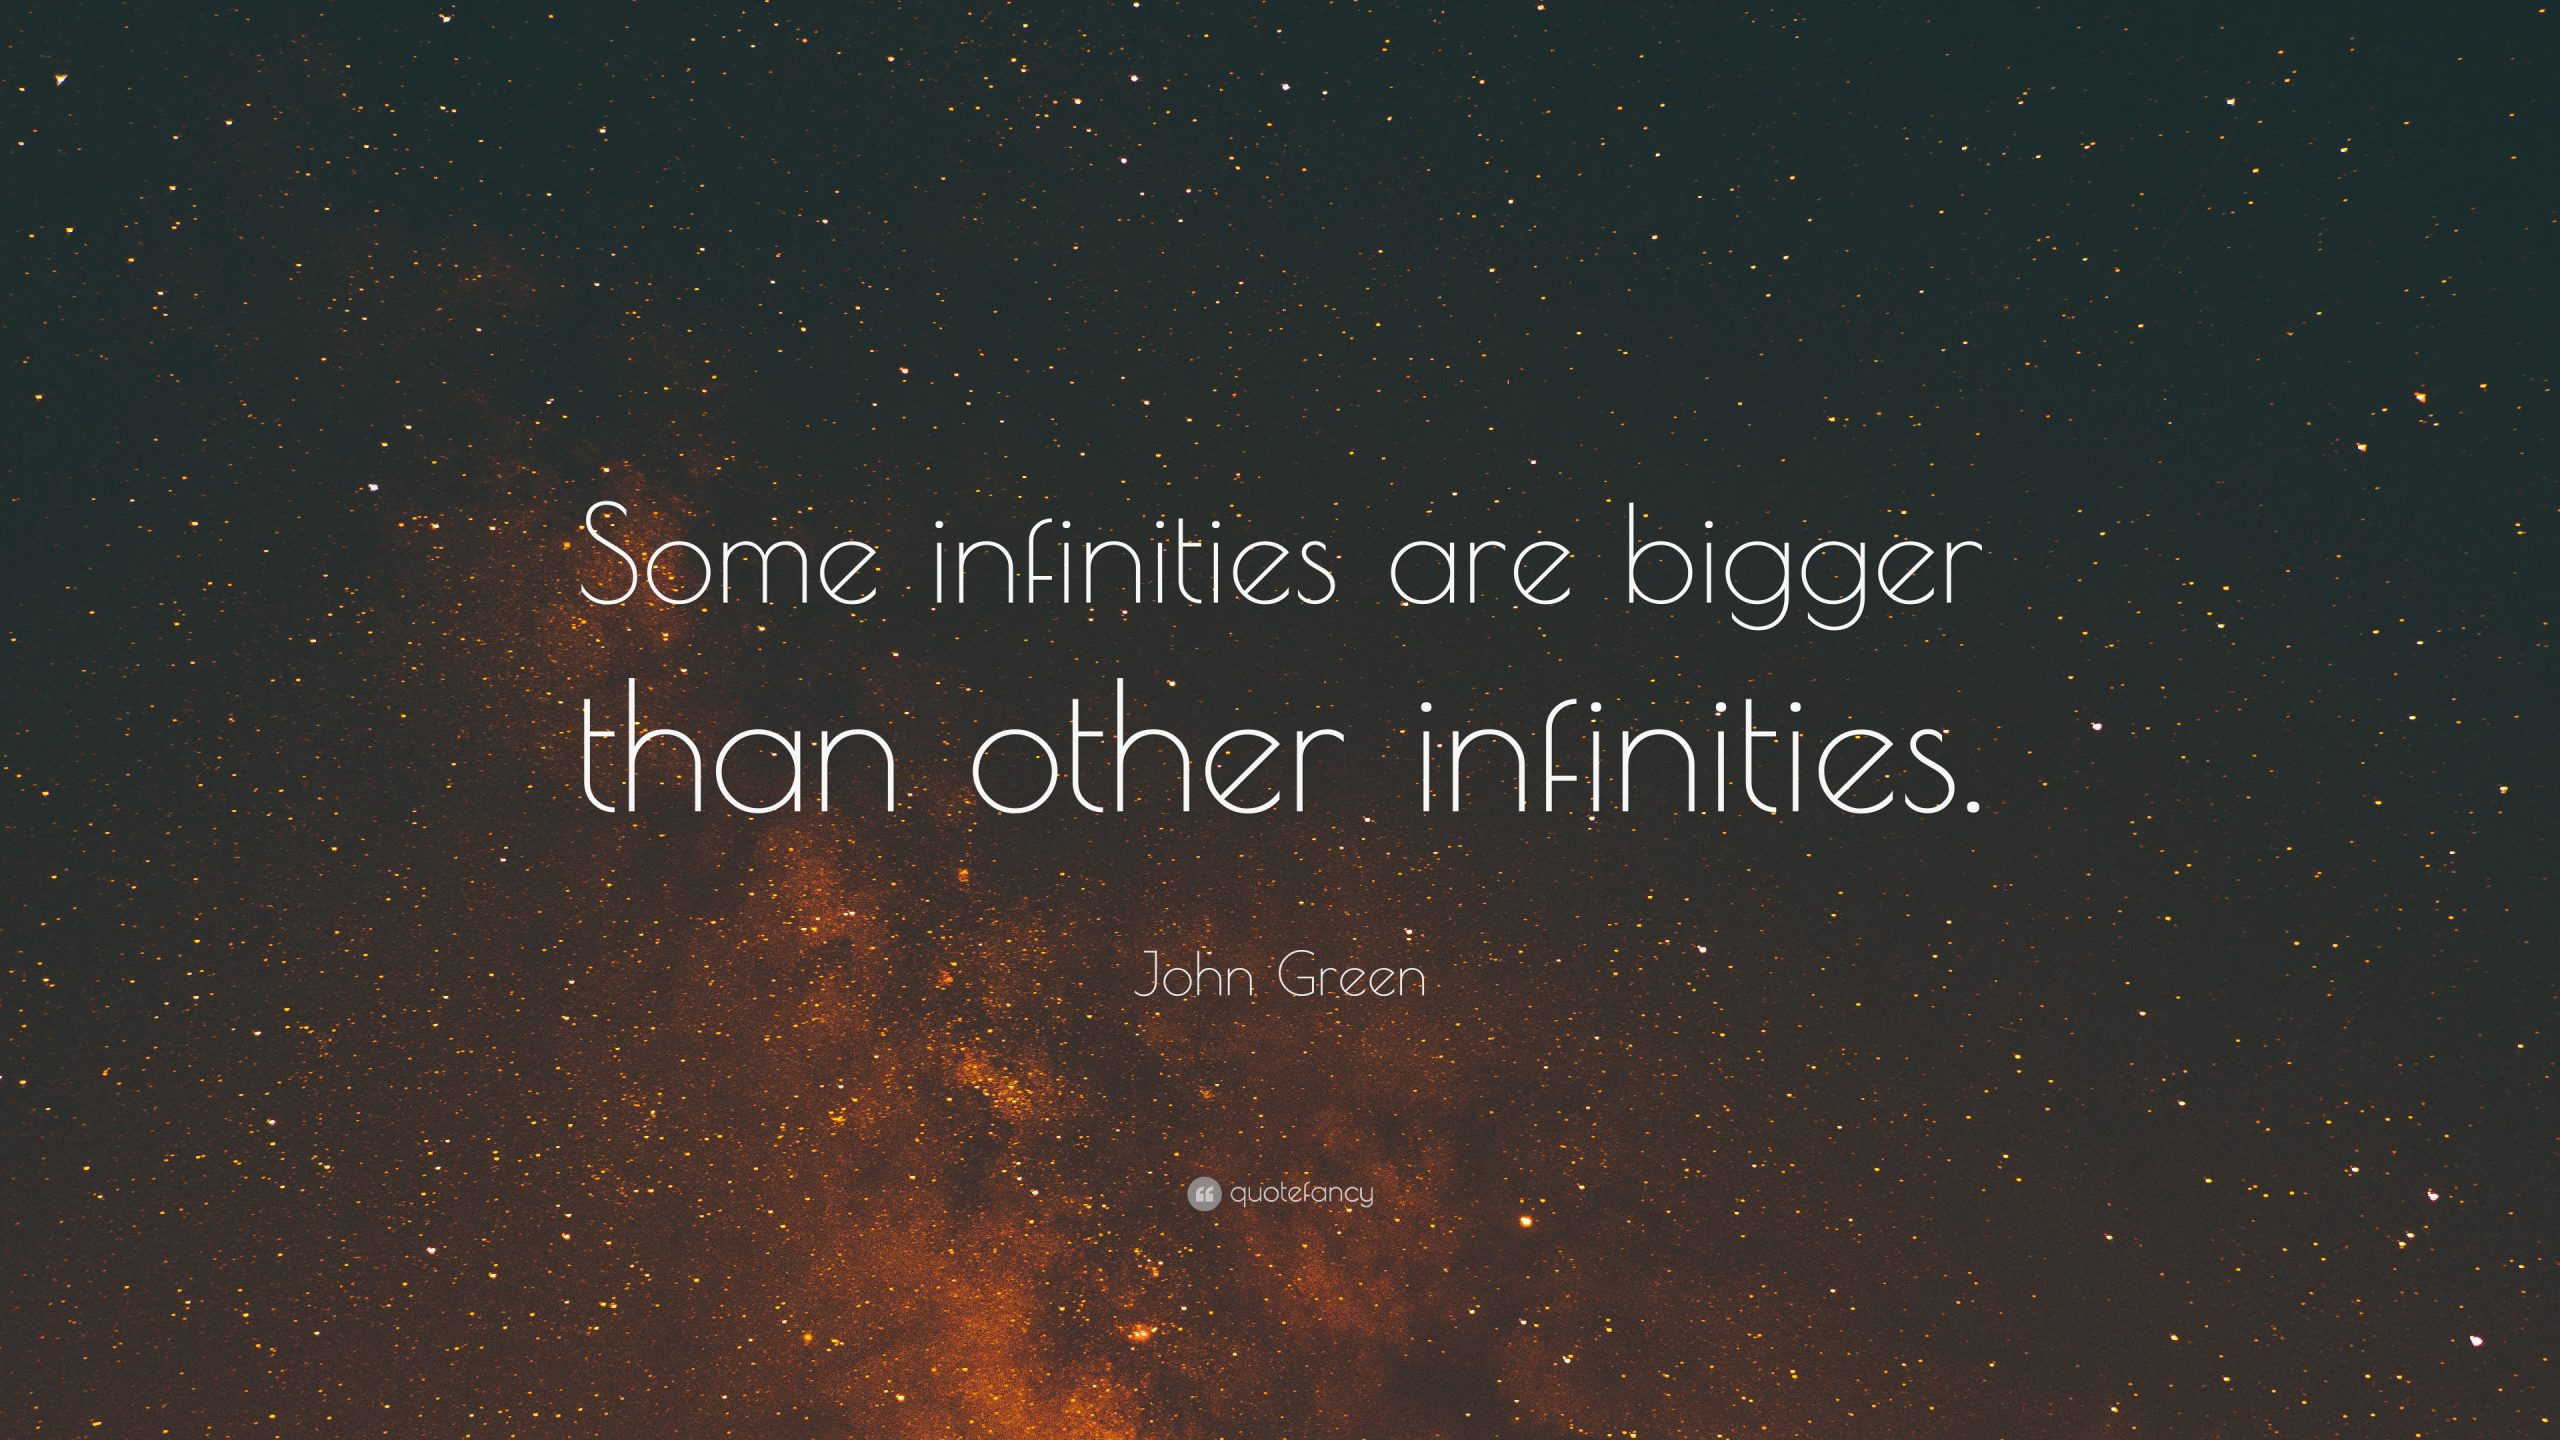 How Can Some Infinities Be Bigger Than Others?